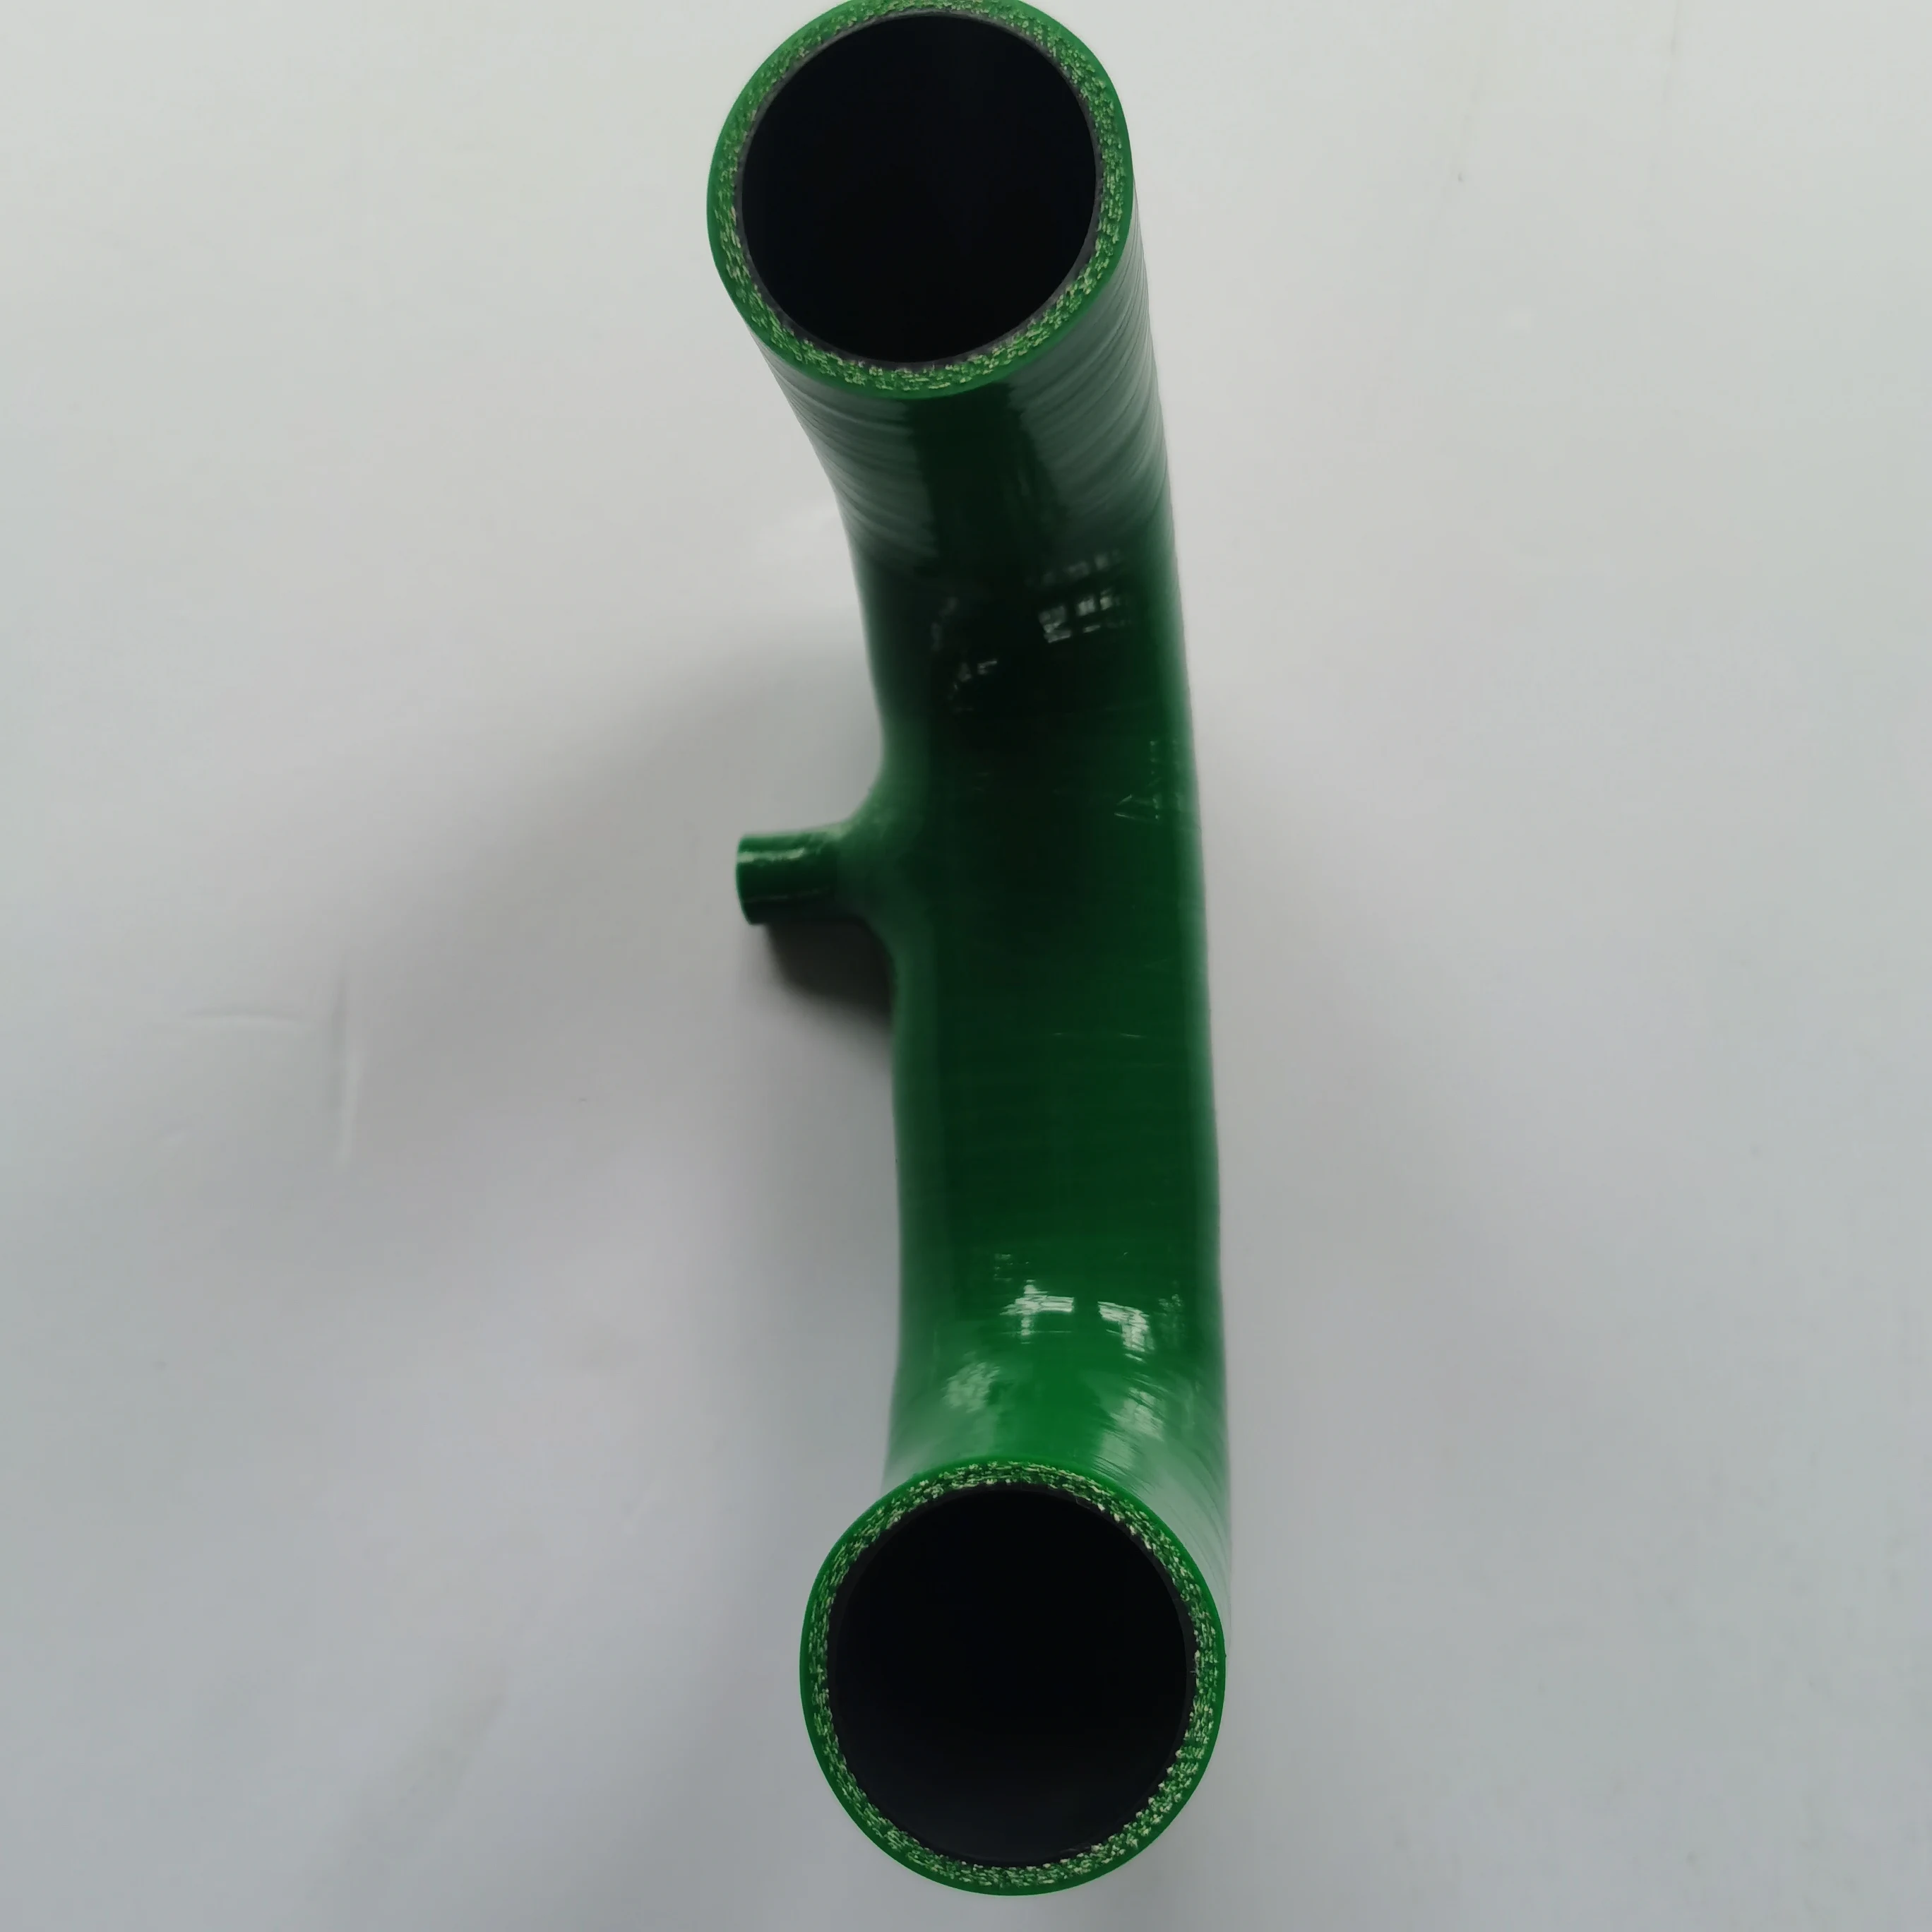 Wholesales Silicone Tube Joint Kit High Quality Flexible Hose For Hydrogen Fuel Engine